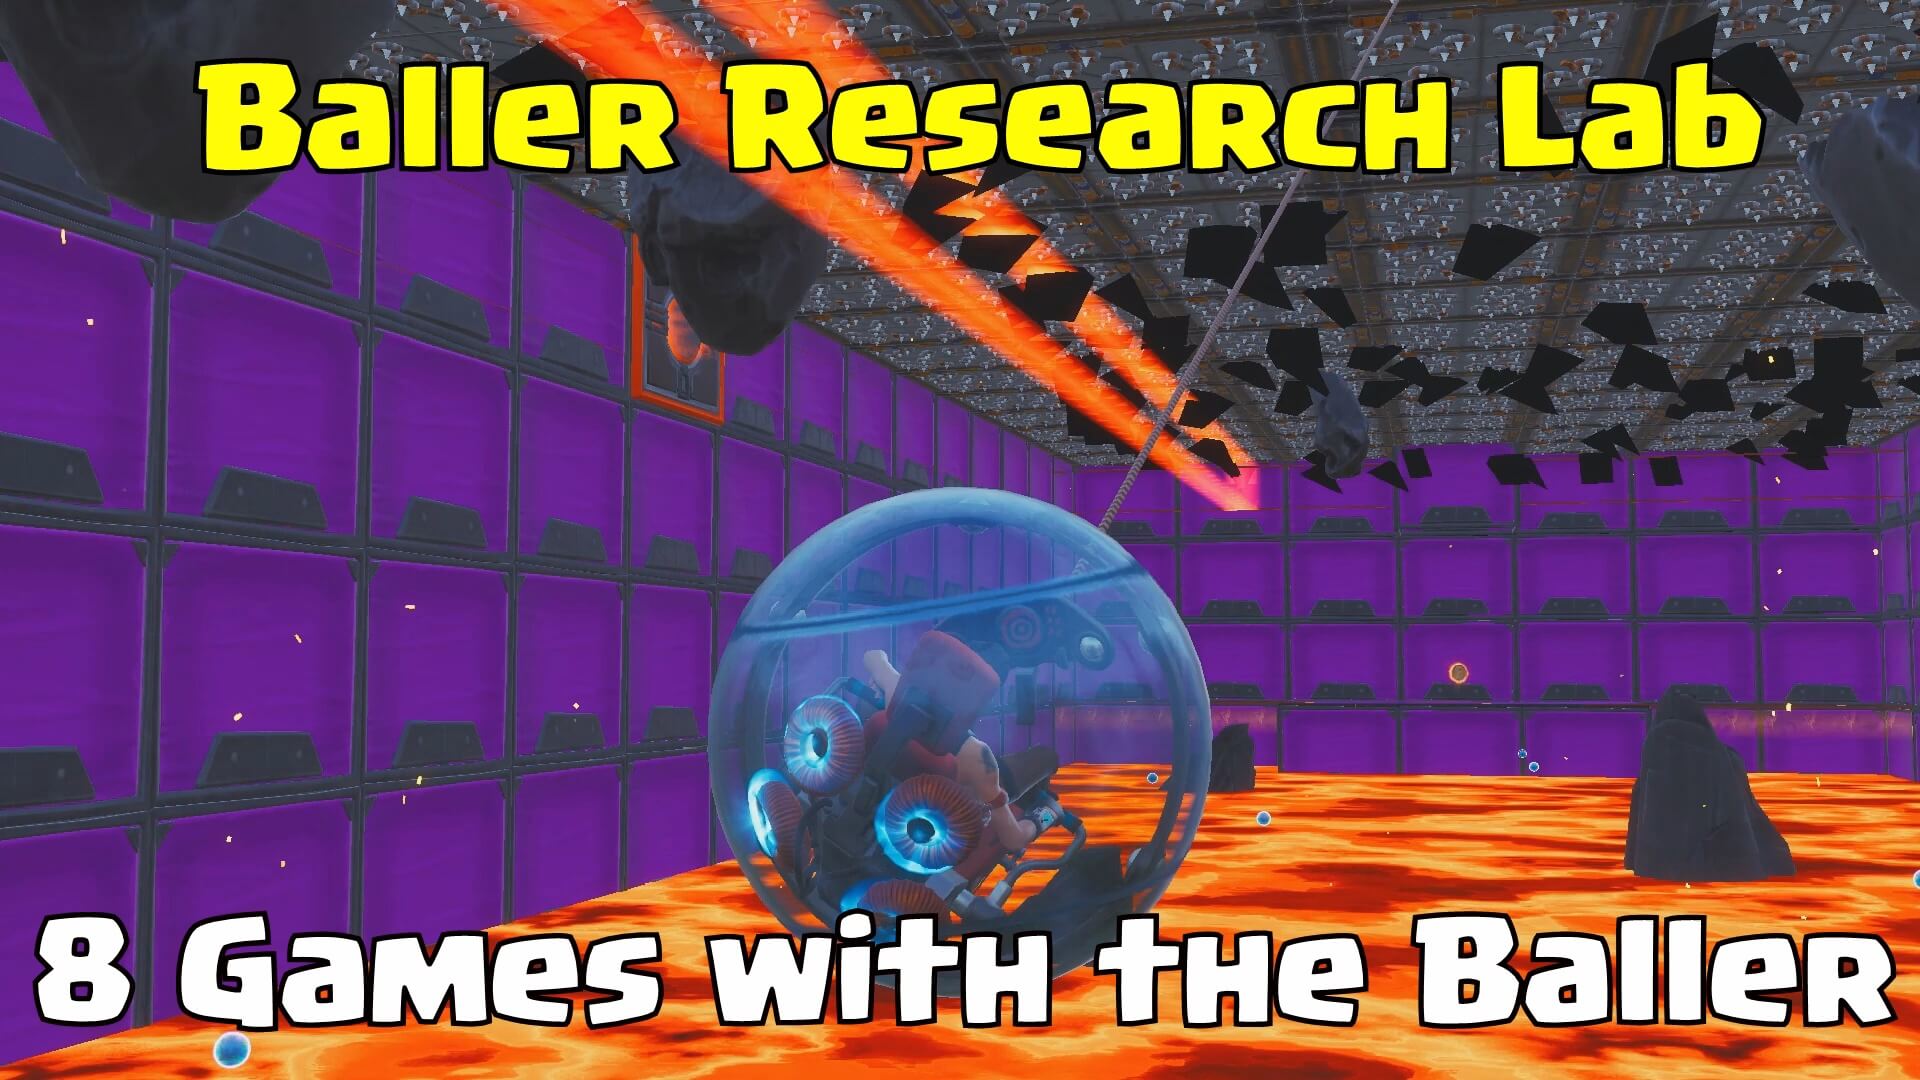 THE BALLER RESEARCH LAB